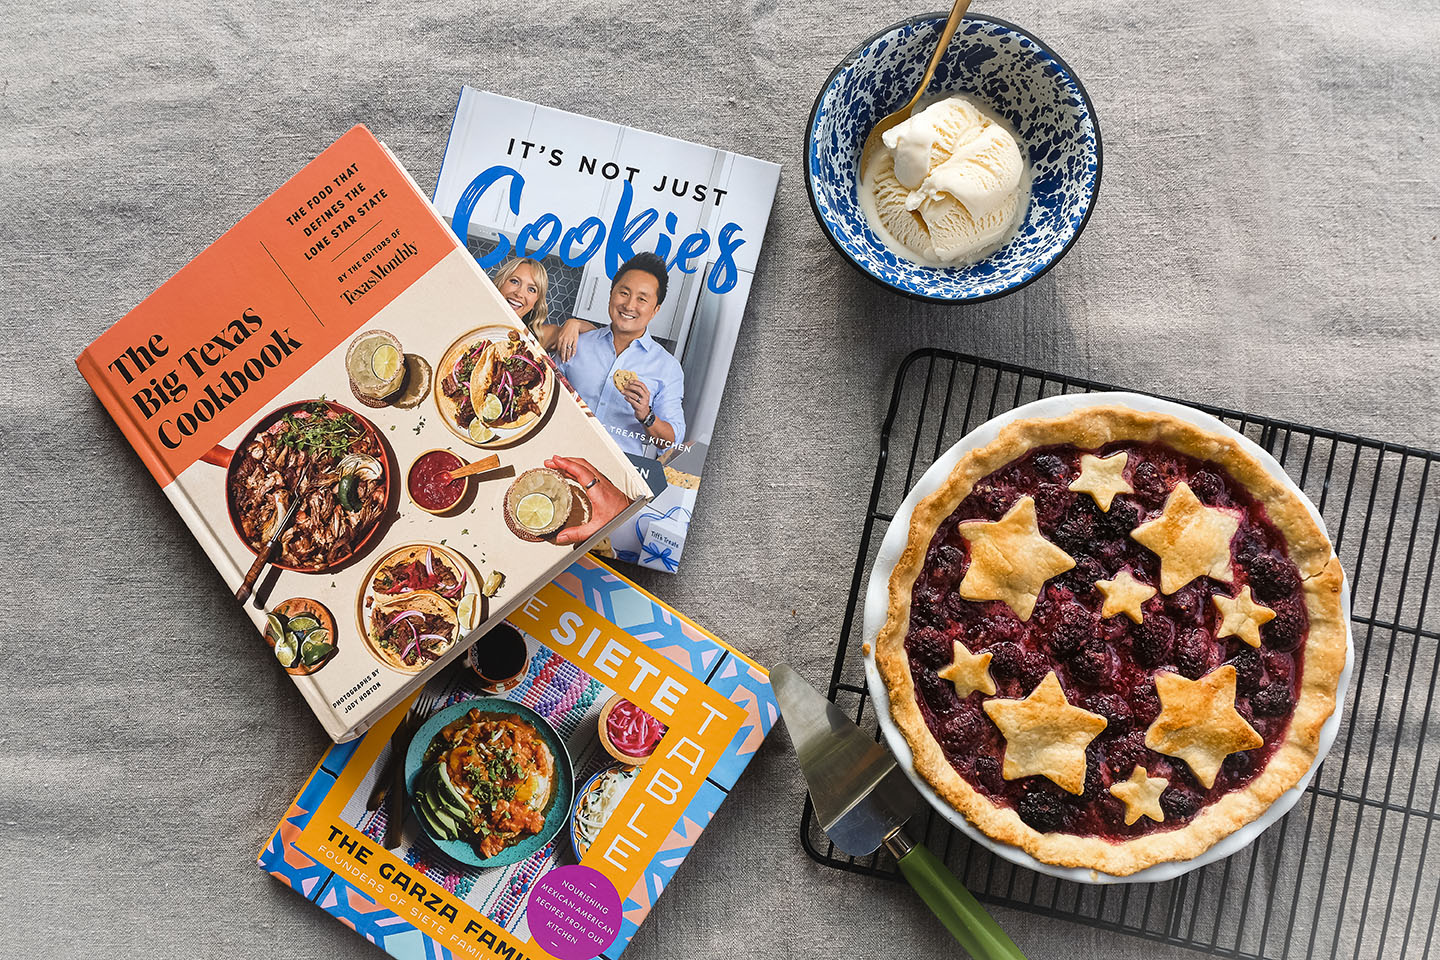 A collection of three Texas cookbooks with a fresh pie and bowl of ice cream on the side.